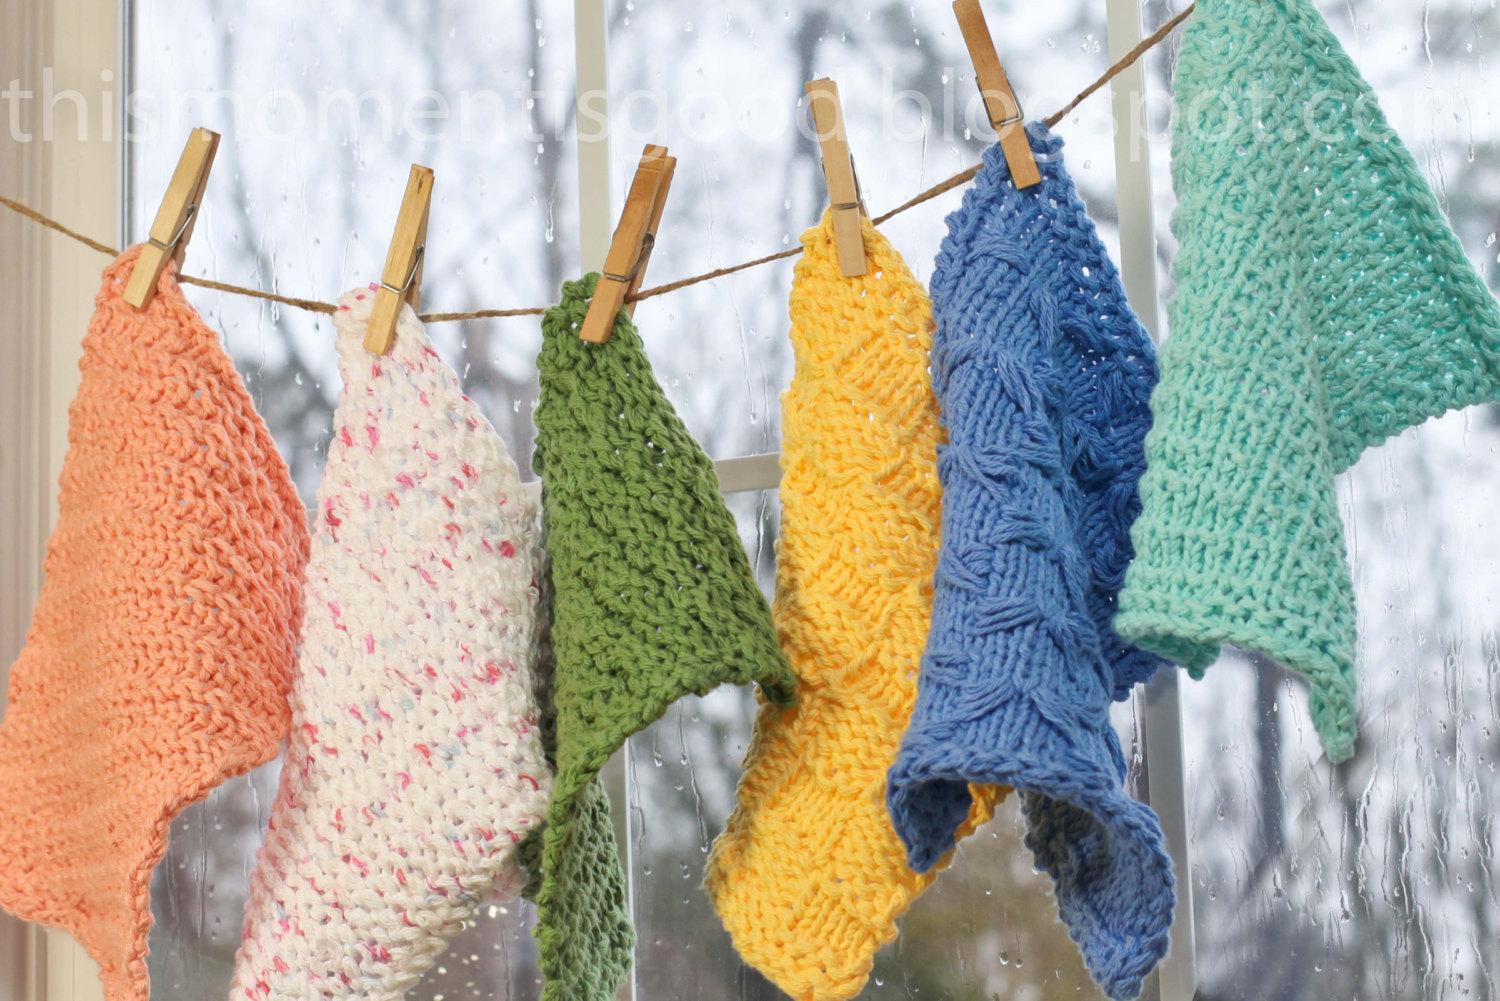 7 Basic Knitting Stitches for Beginners